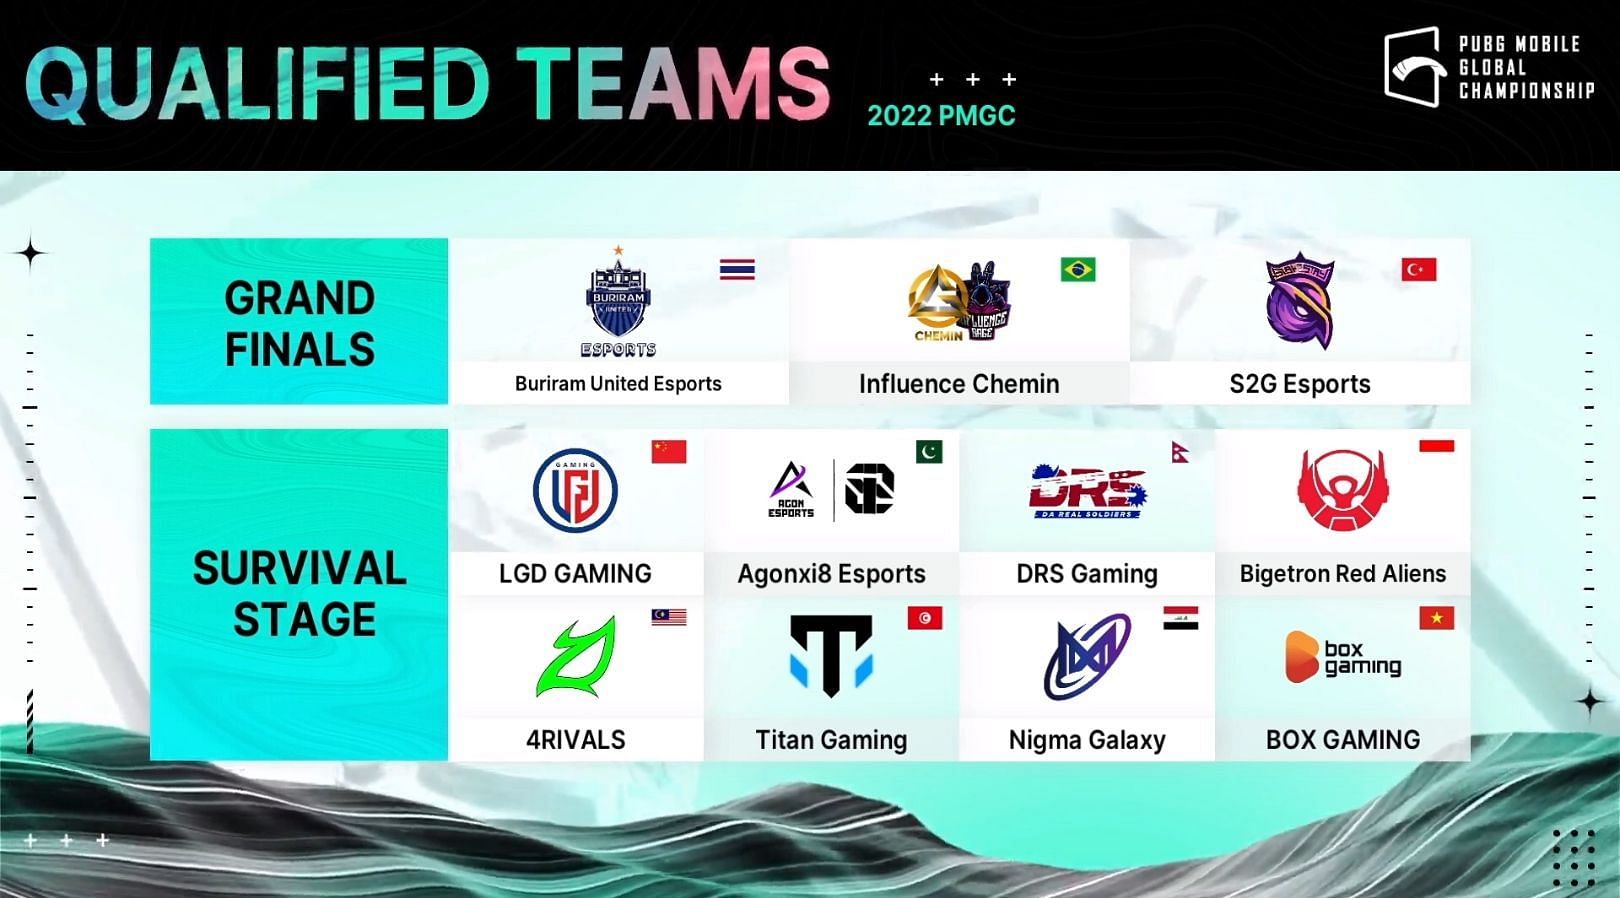 Qualified teams for Grand Finals and Survival Stage from Group Red (Image via PUBG Mobile)